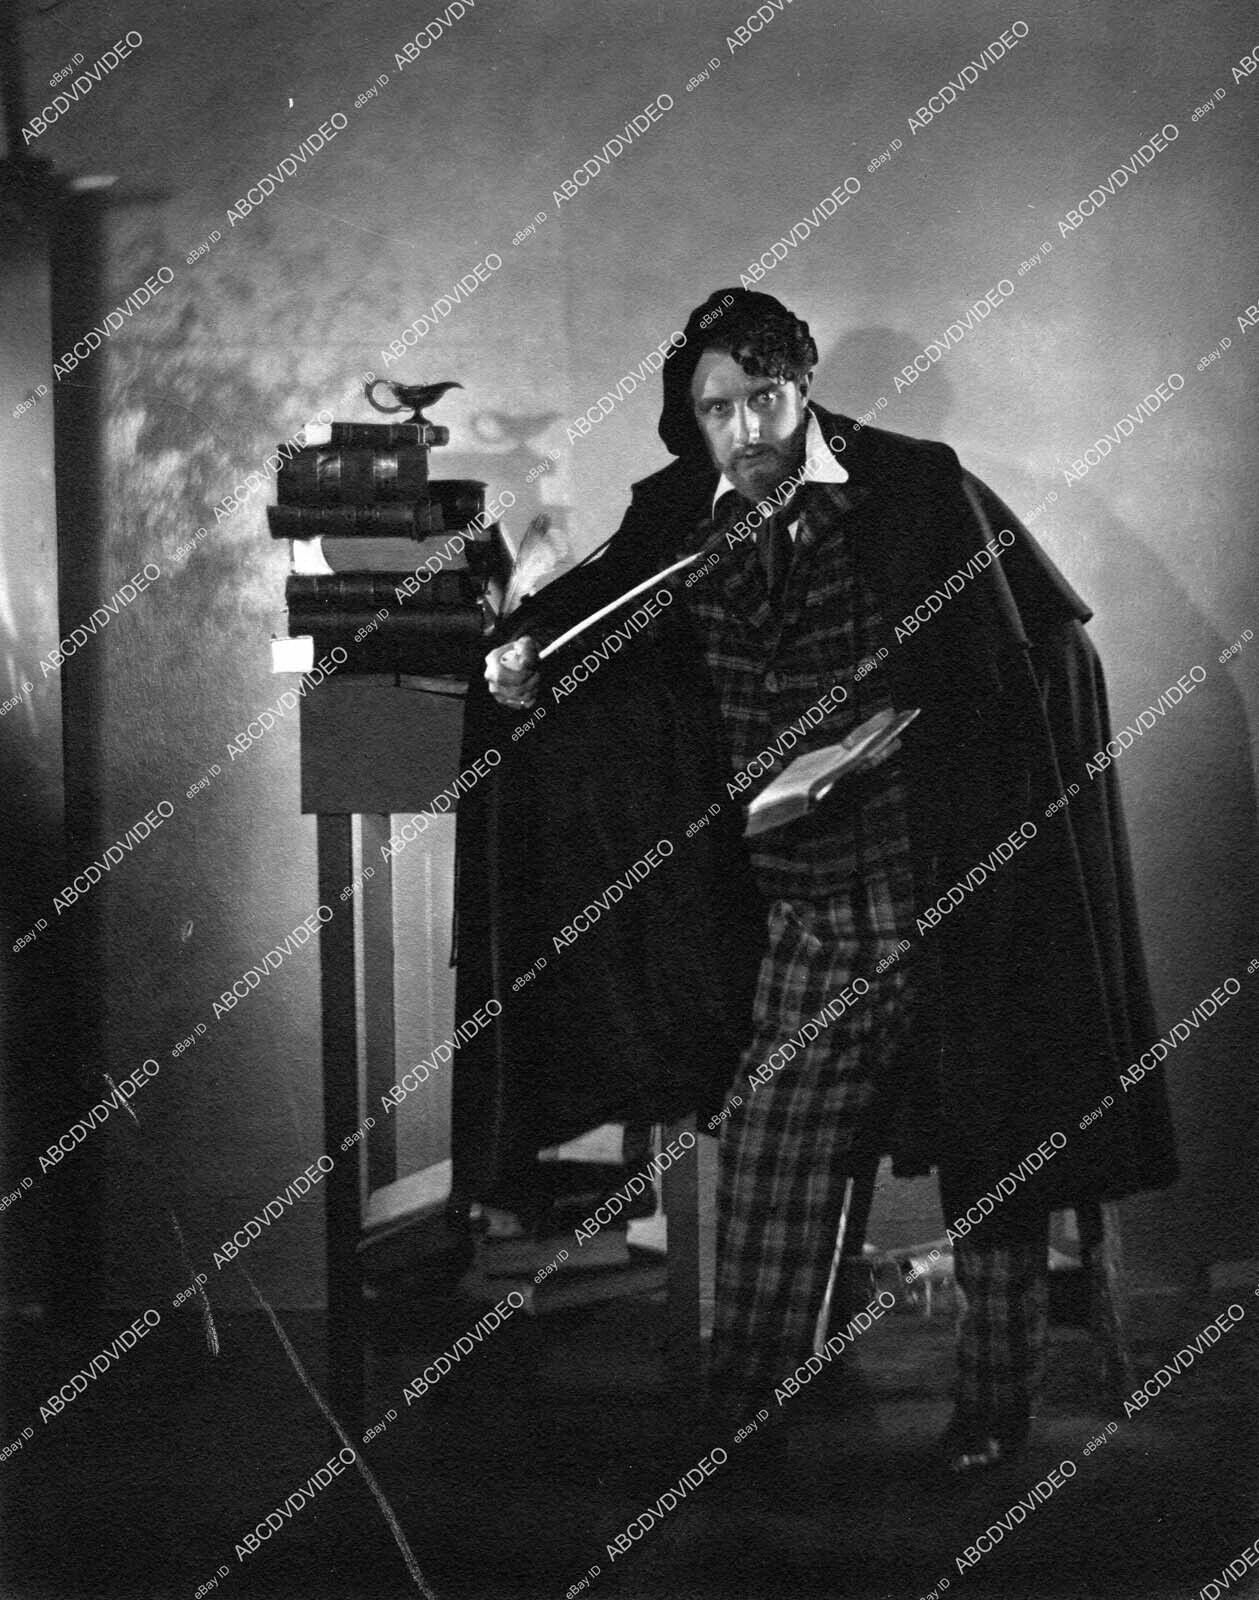 crp-54550 1926 unknown actors George Hassell maybe silent film La Boheme crp-545